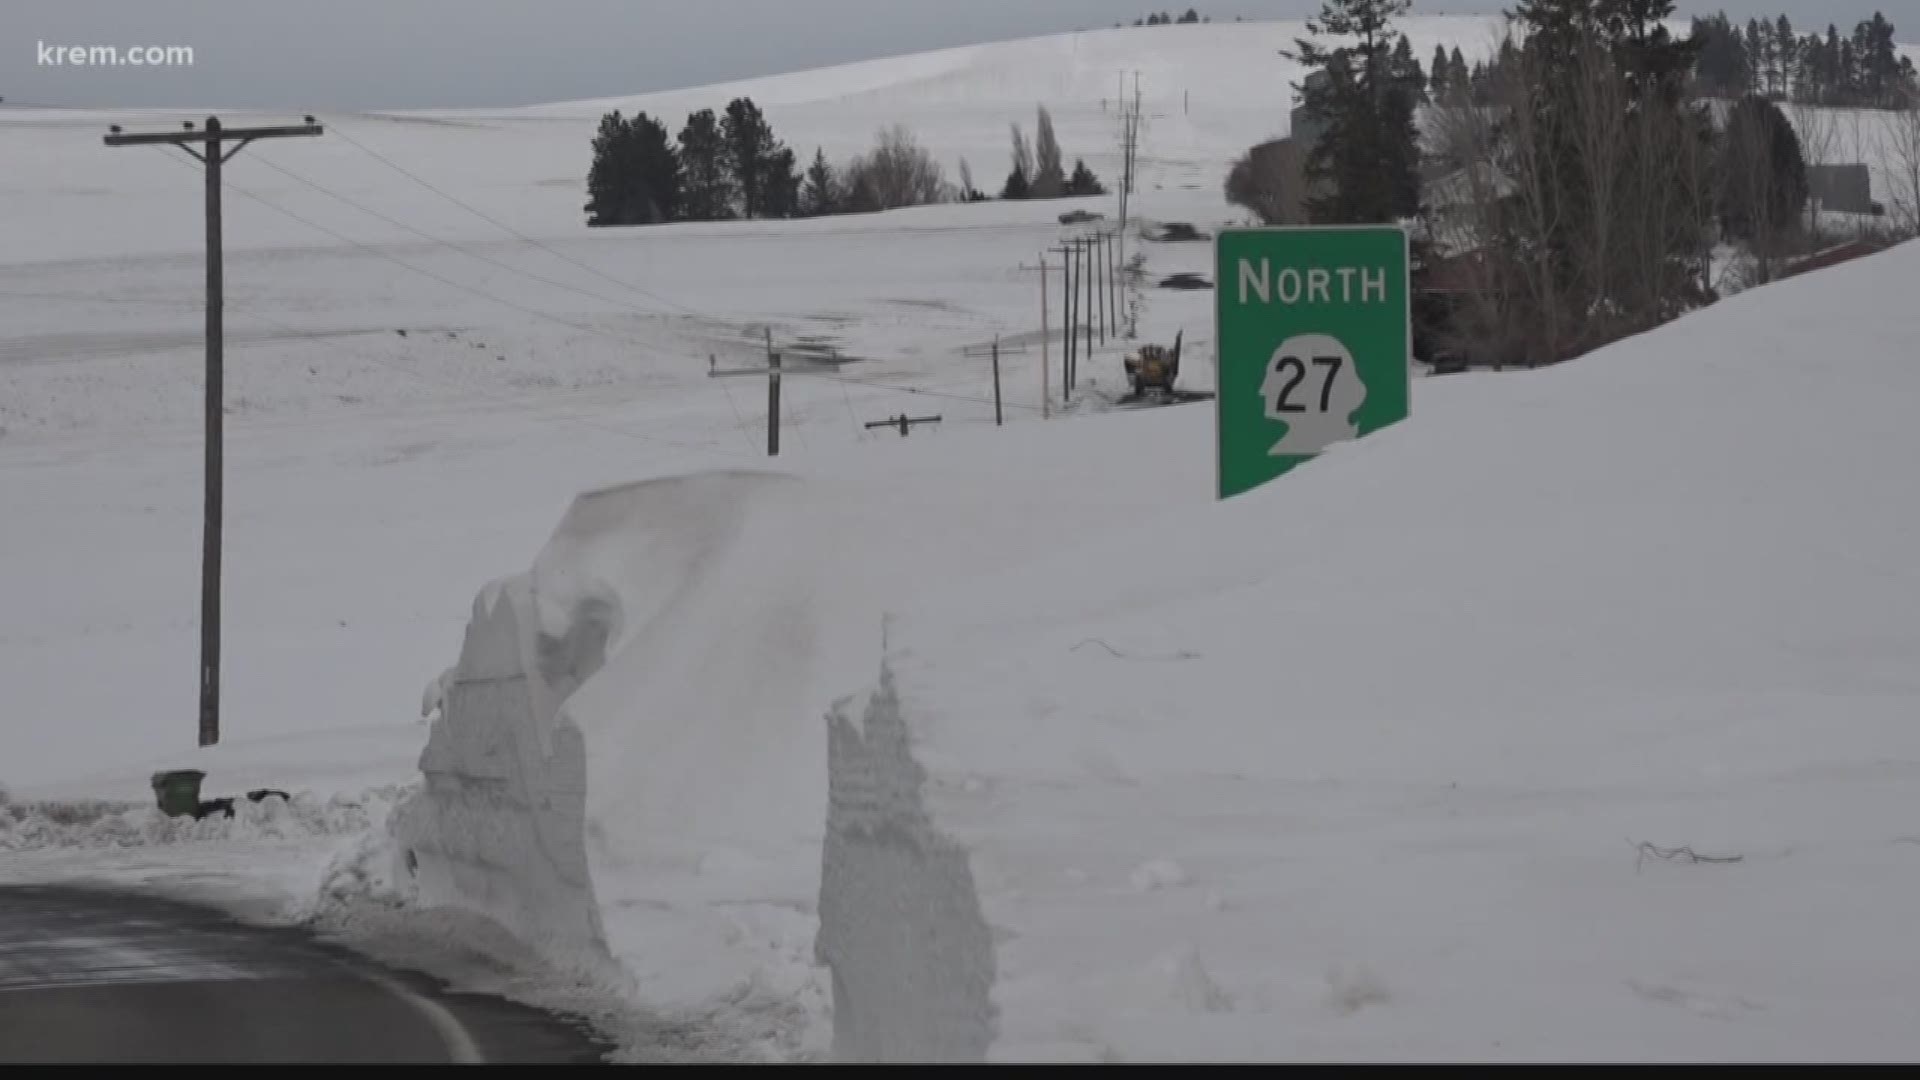 KREM 2 reporter Tim Pham shows highway 27 is now open after being cleared of large snow drifts.